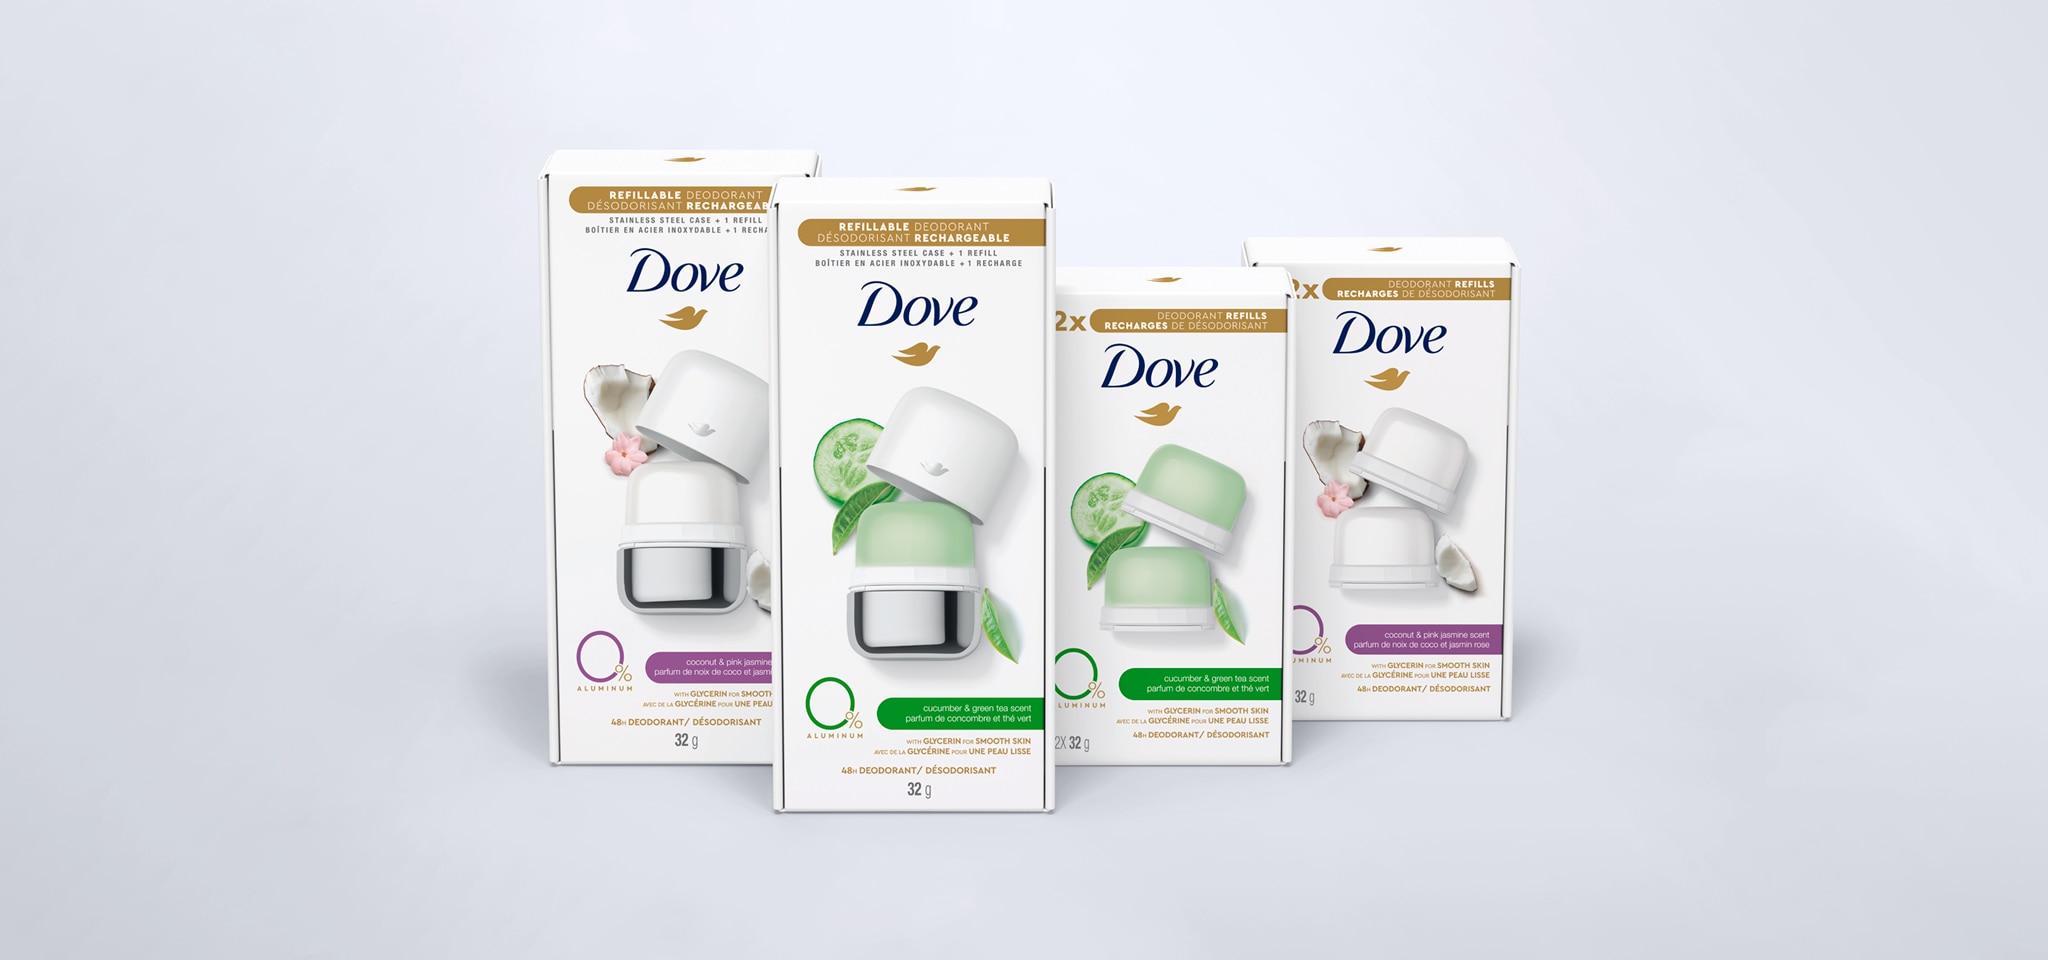 Dove Refillable: Introducing our first refillable, reusable deodorant